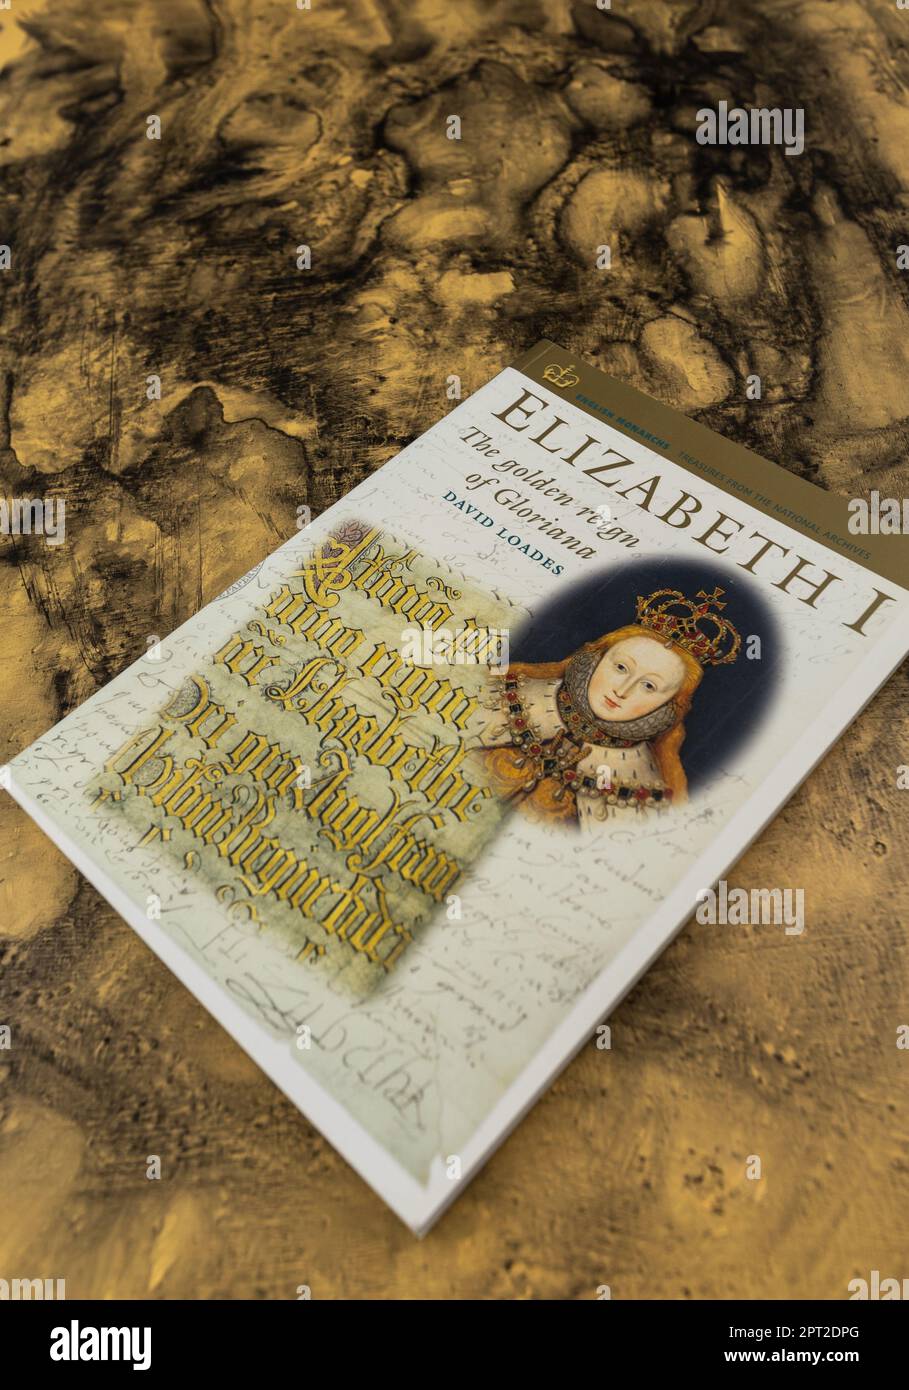 A  major biography by a leading Tudor expert to mark the 400th anniversary of her death in 1603. An illustrated hardback book published in 2003. Stock Photo